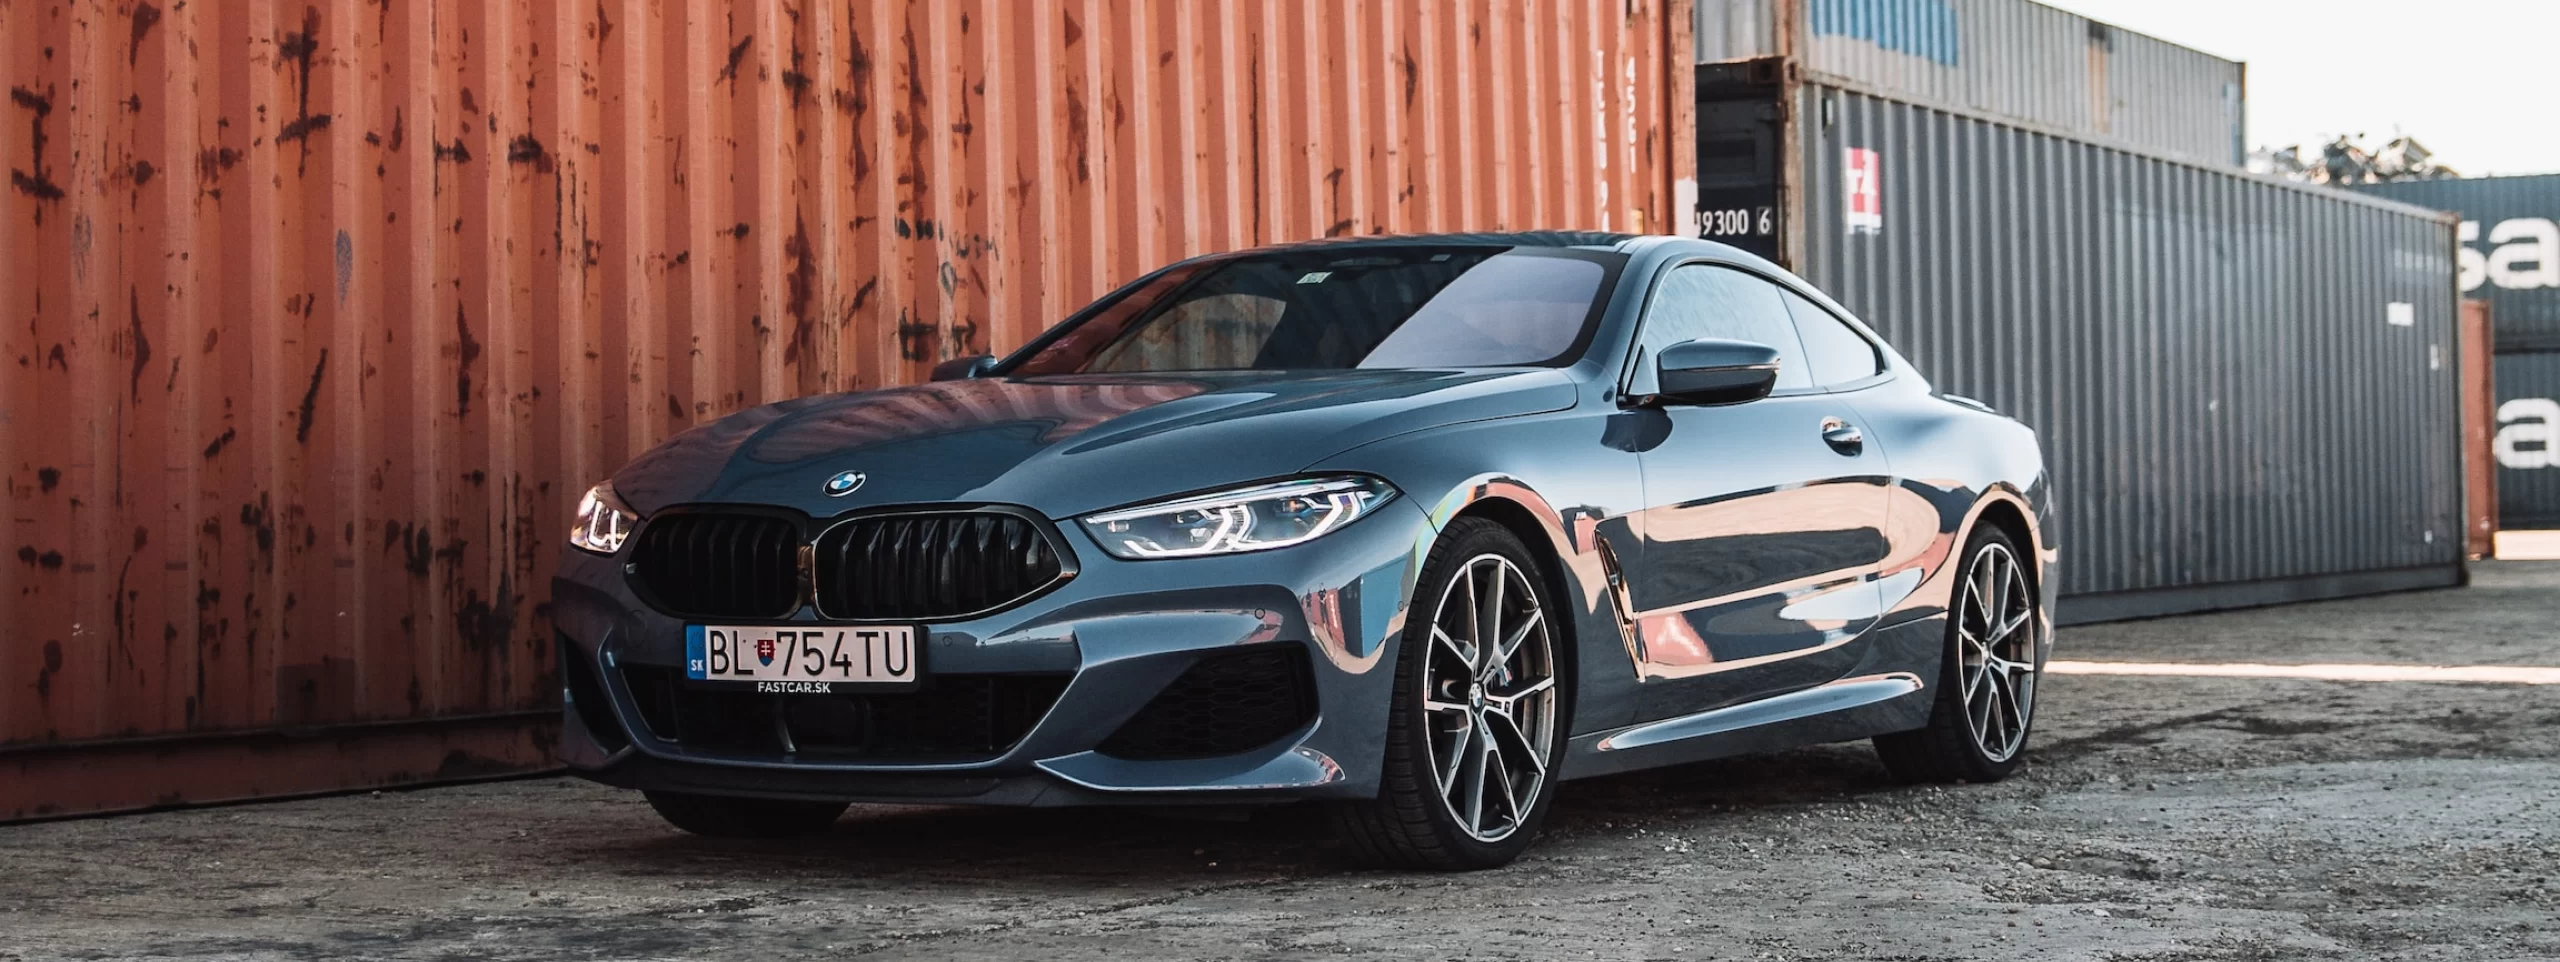 The BMW M8 Coupe is parked in front of an automotive shipping container.